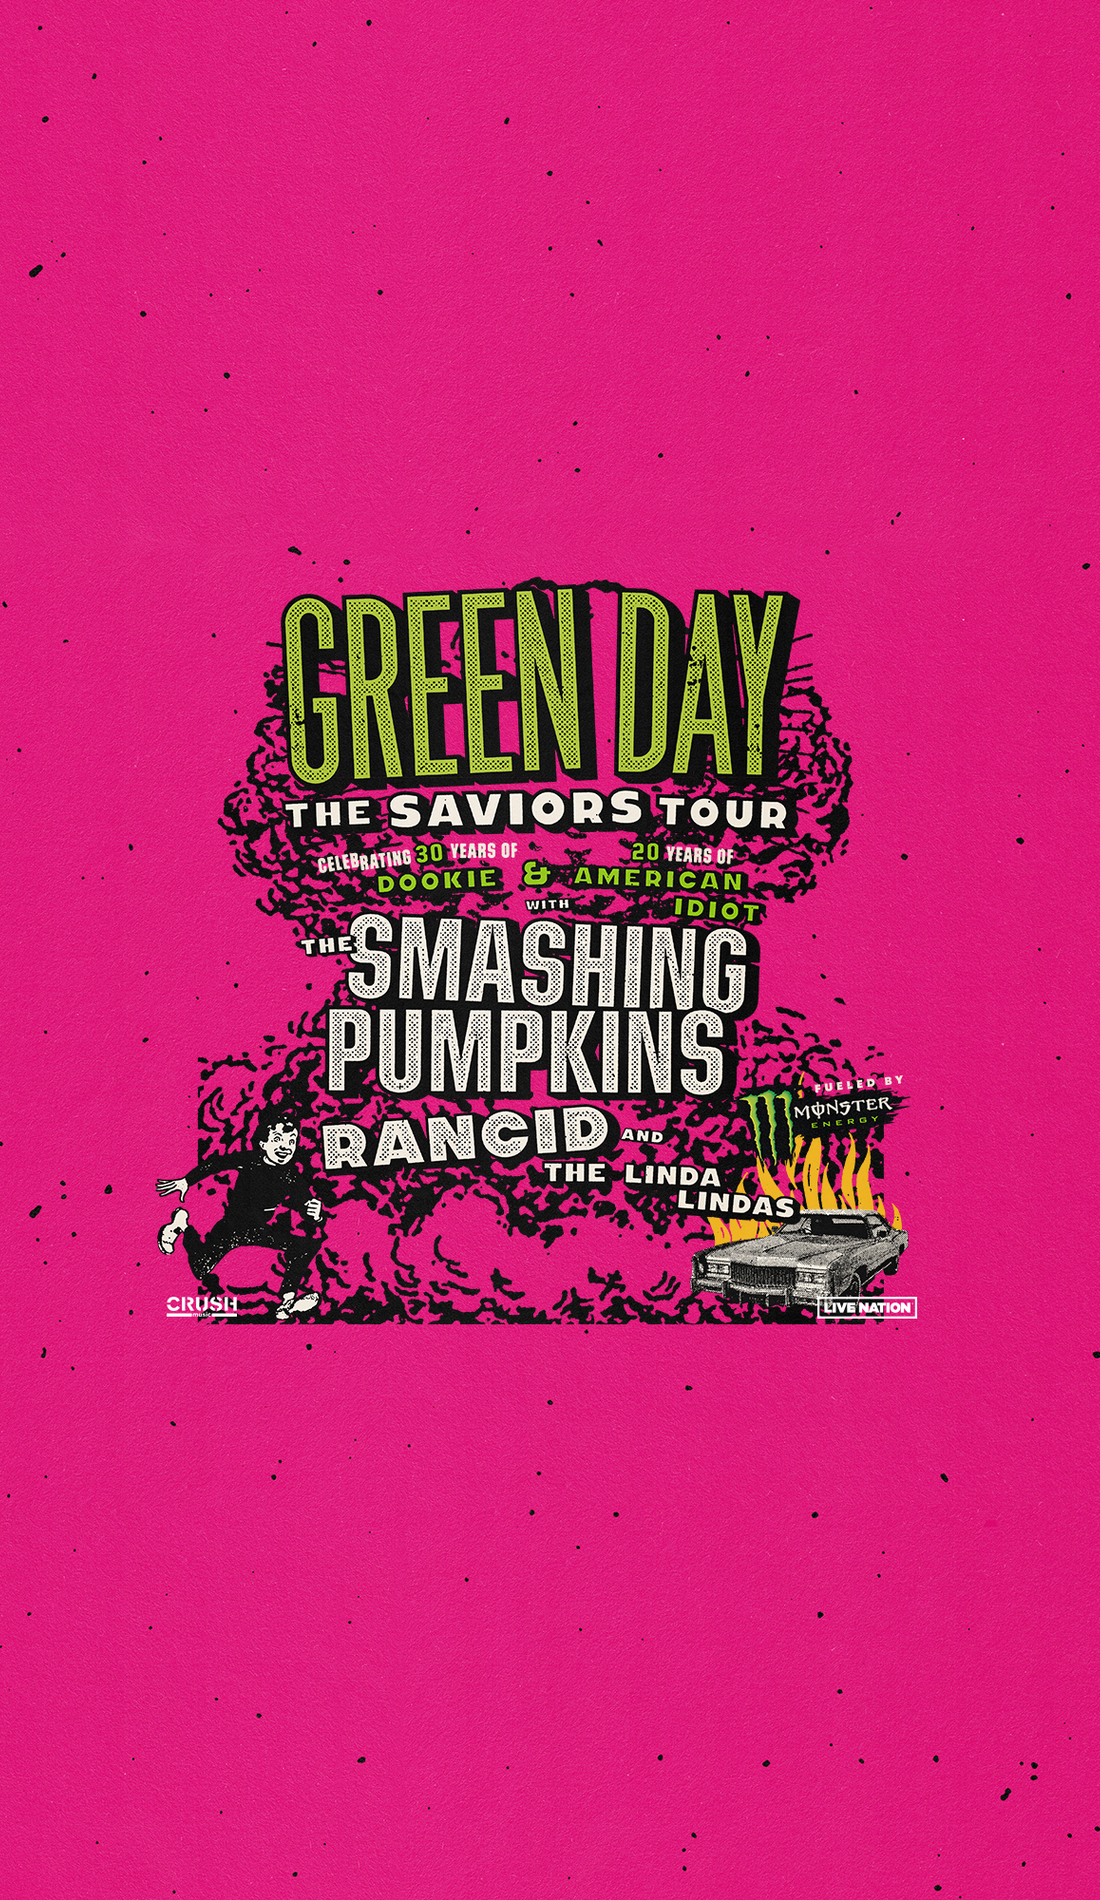 A Green Day live event